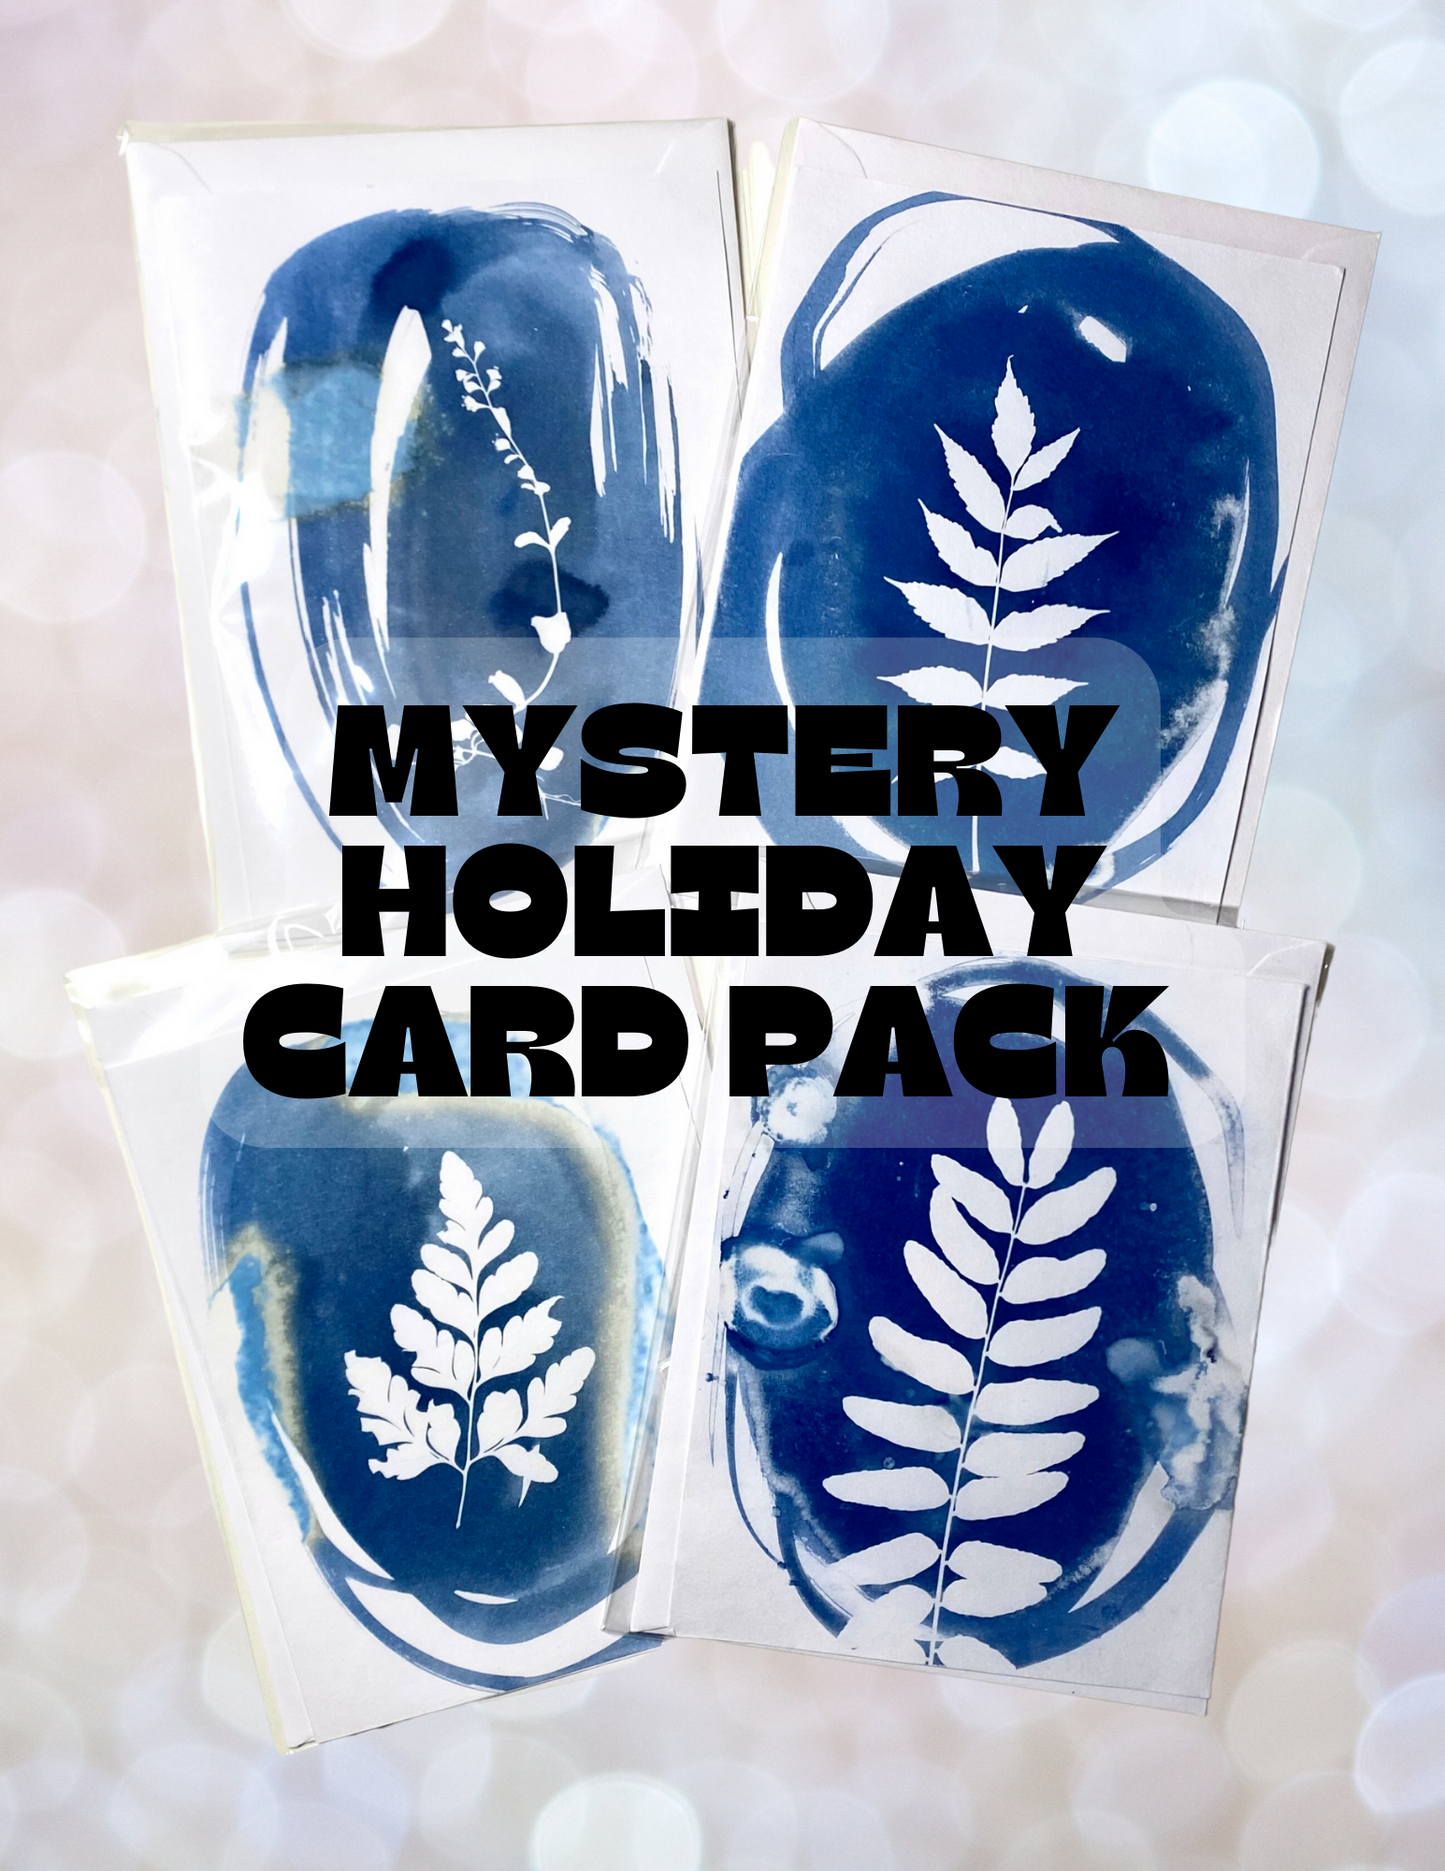 Mystery holiday cards